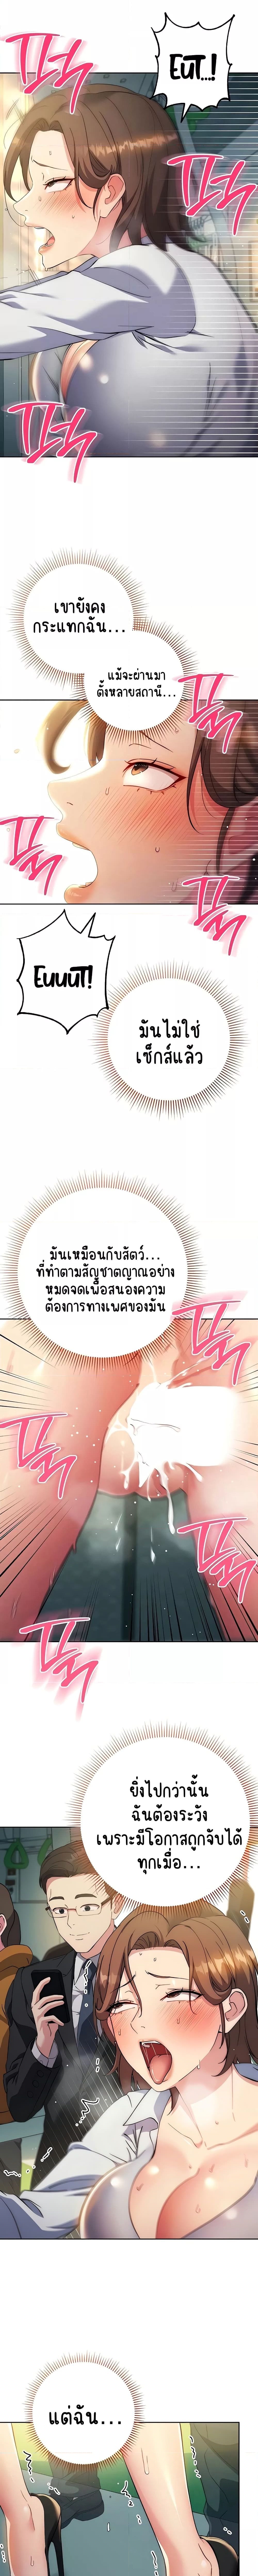 Outsider: The Invisible Man ตอนที่ 10 ภาพ 8